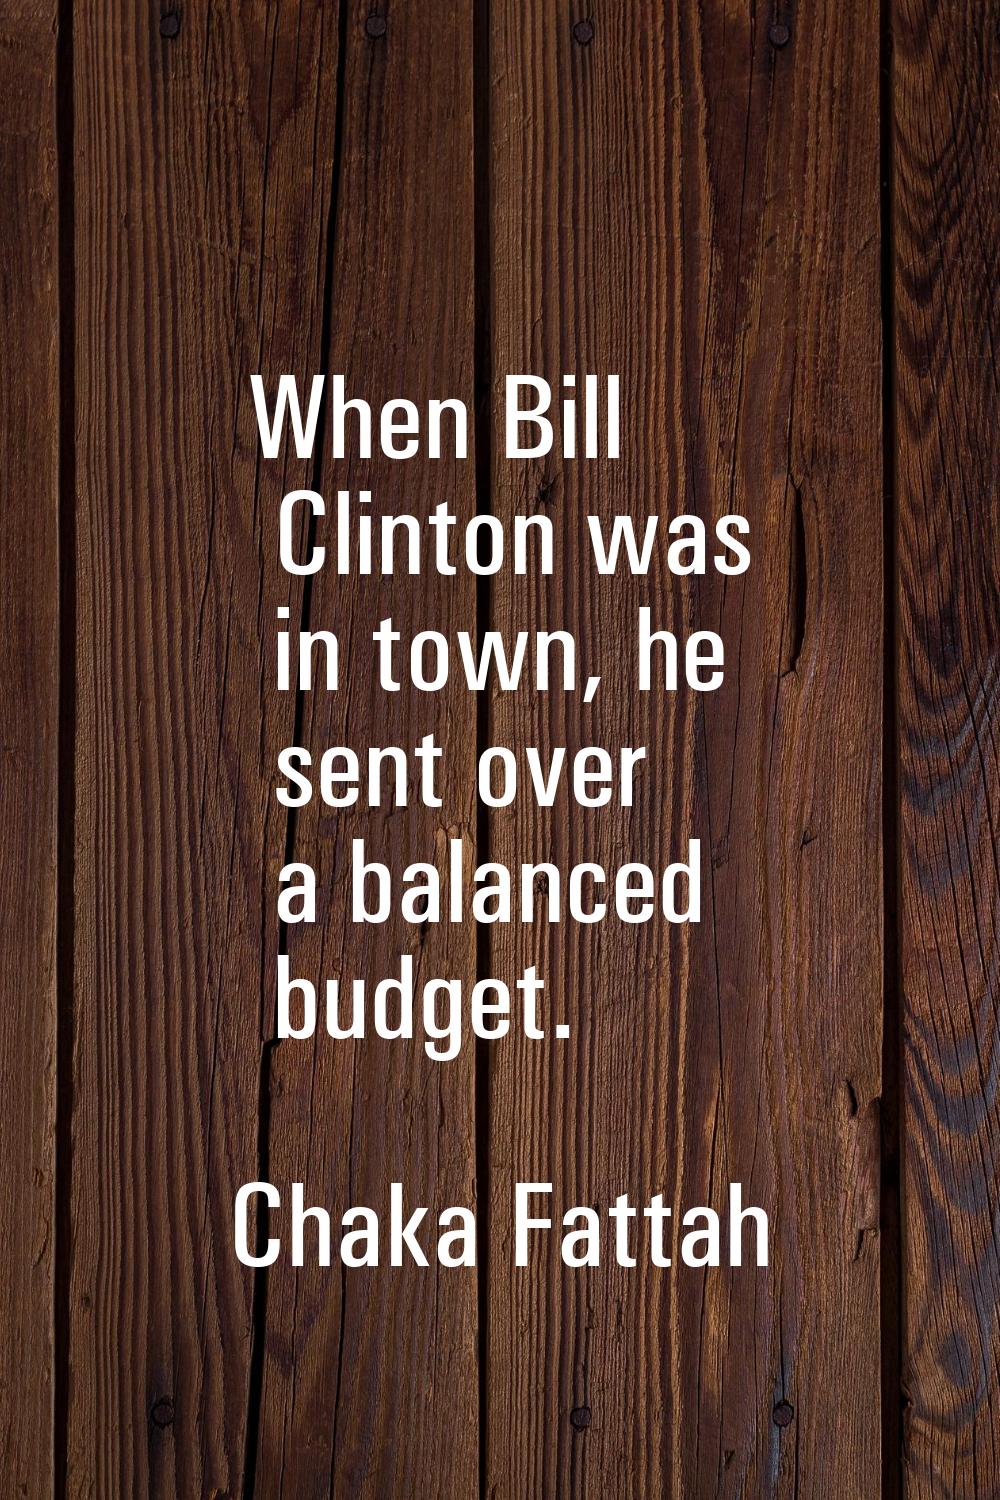 When Bill Clinton was in town, he sent over a balanced budget.